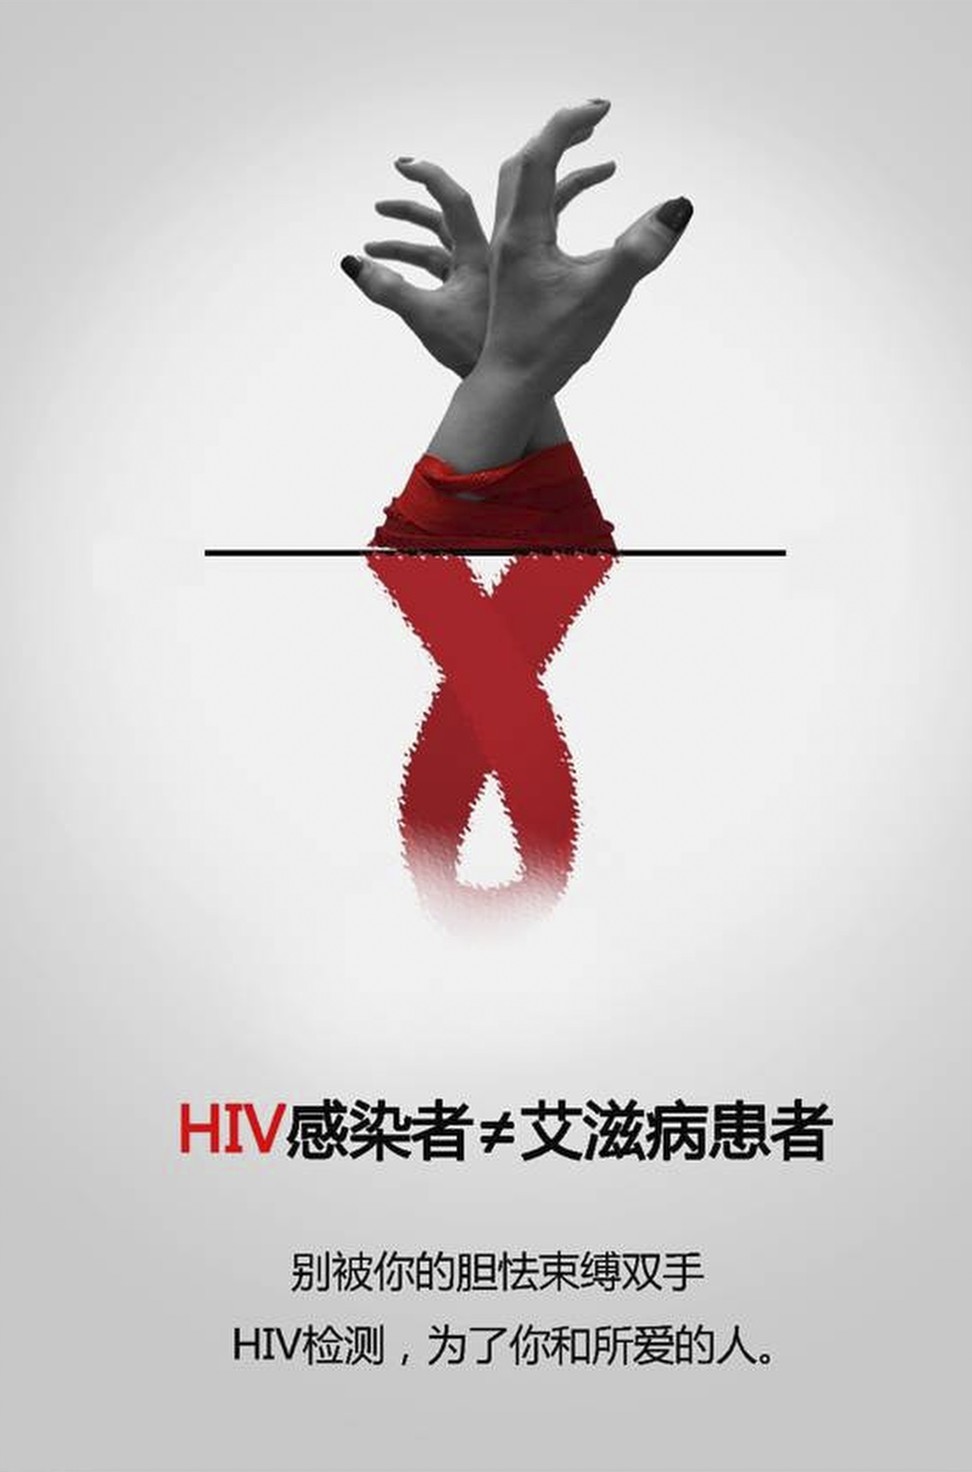 This image to promote HIV testing tells people: “HIV infection does not equal Aids. Don't be afraid. Test for your loved ones.” Photo: Handout